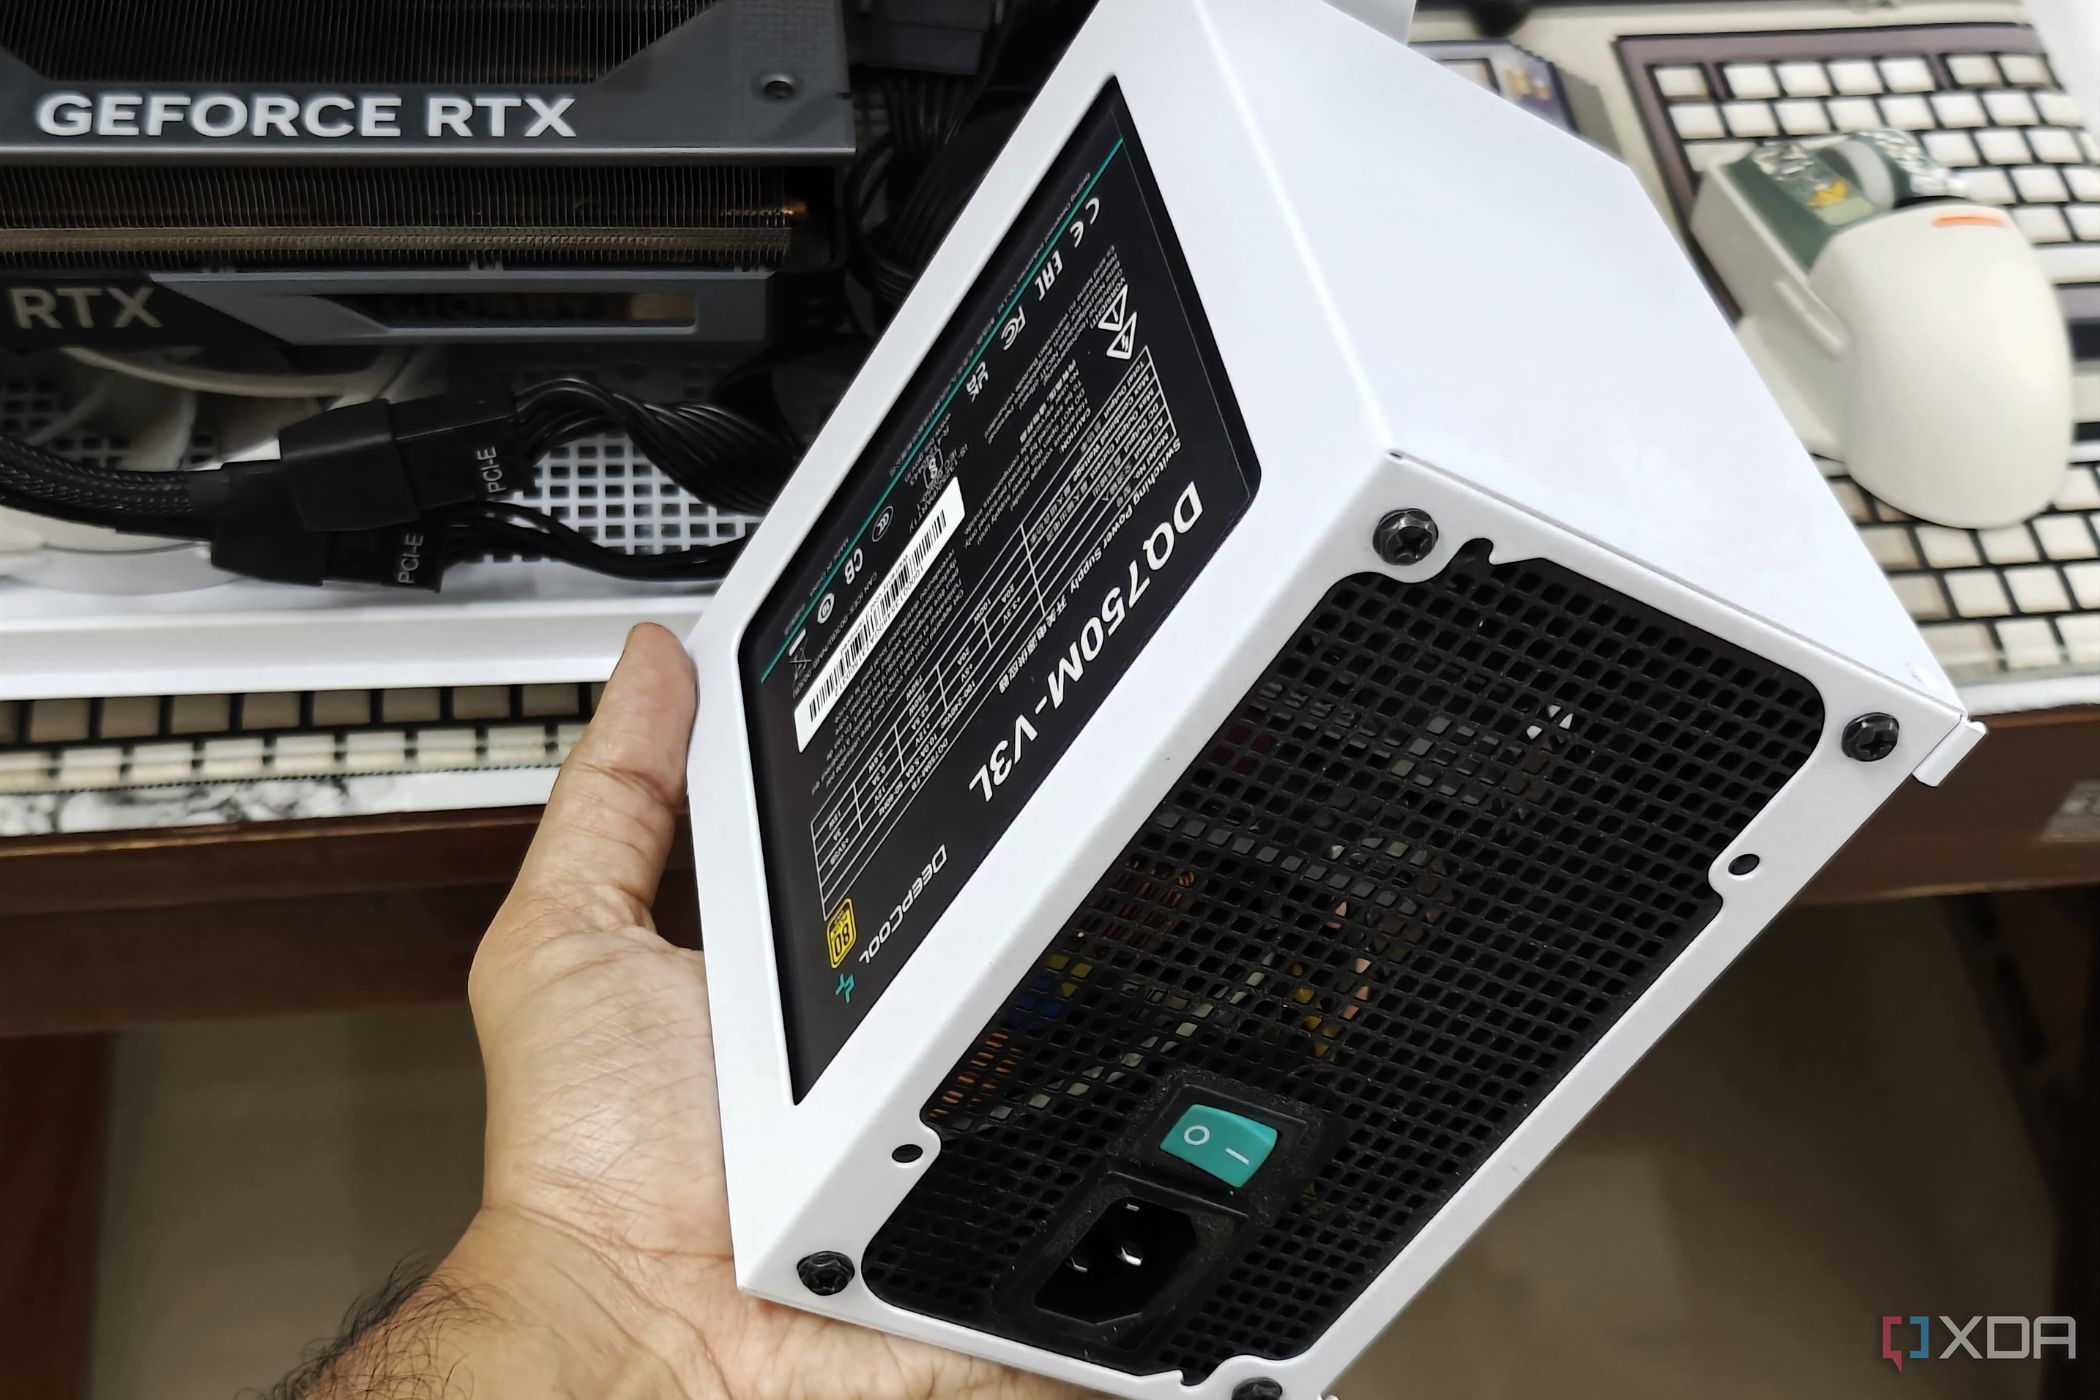 An image showing a person holding the PSU shroud with a PSU in hand.